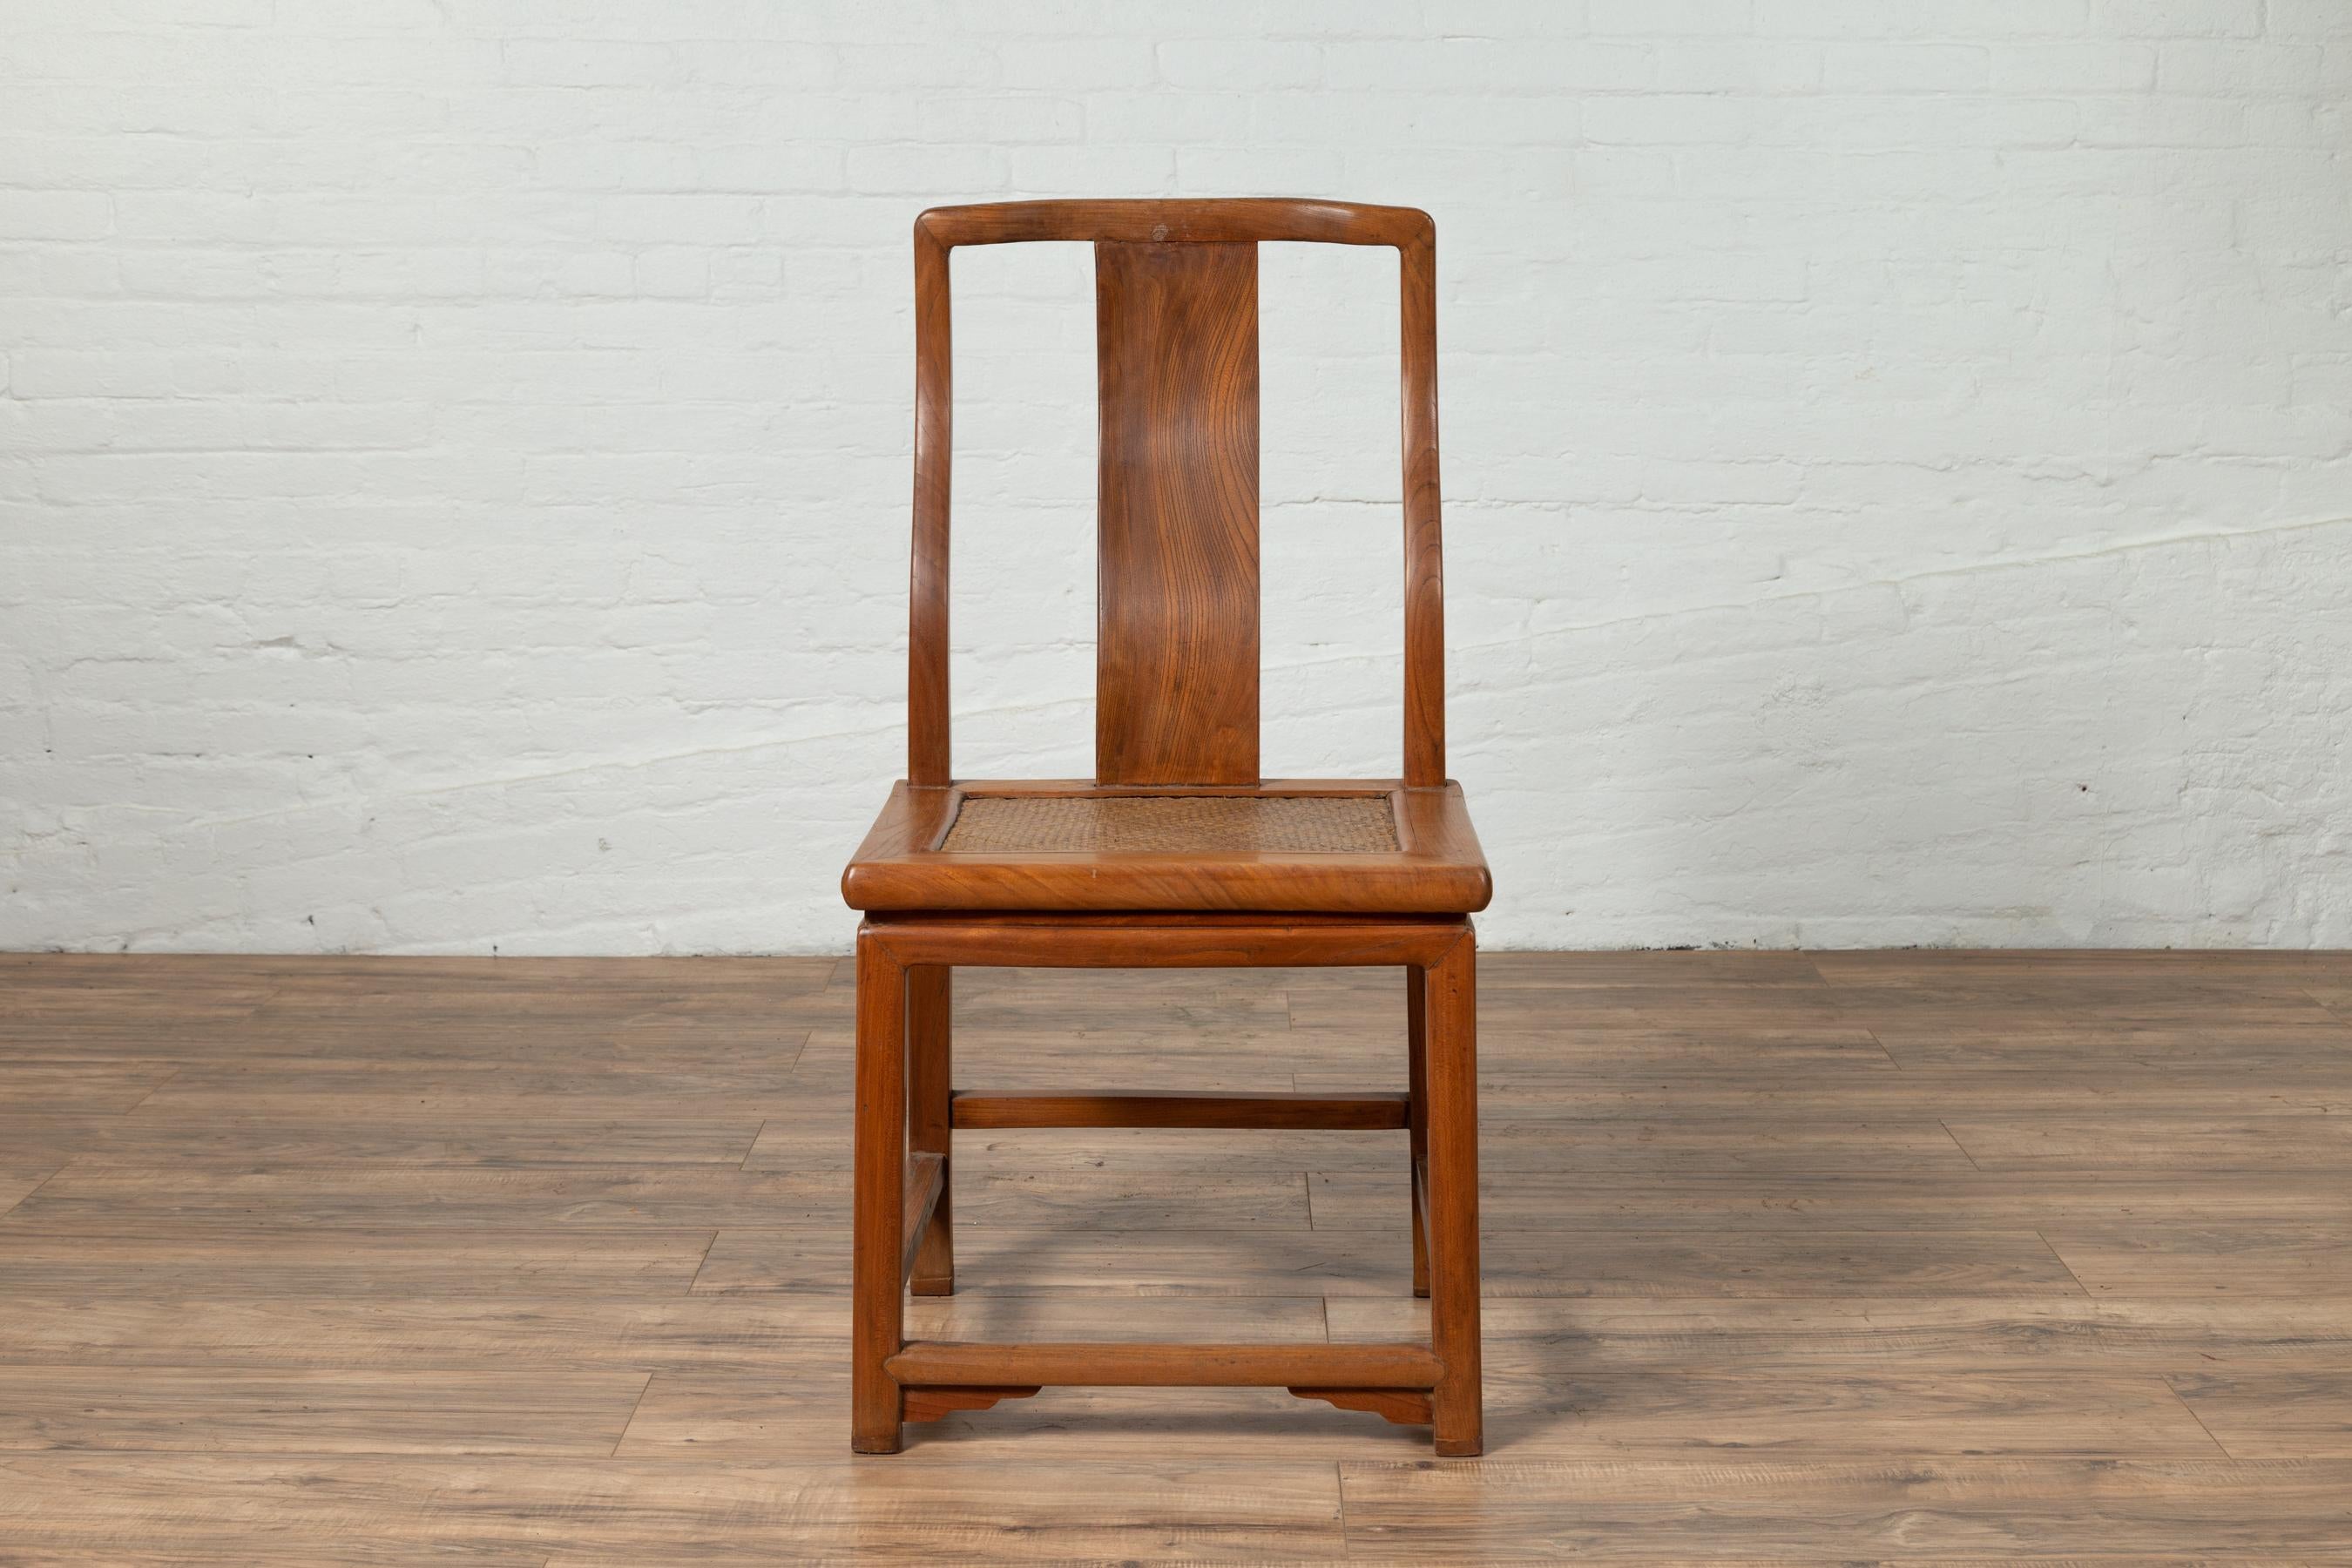 A single Chinese Ming dynasty style vintage wedding side chair from the mid-20th century, with woven rattan seat, curving back splat and natural wood patina. Born in China during the mid-century period, this elegant side chair features an open back